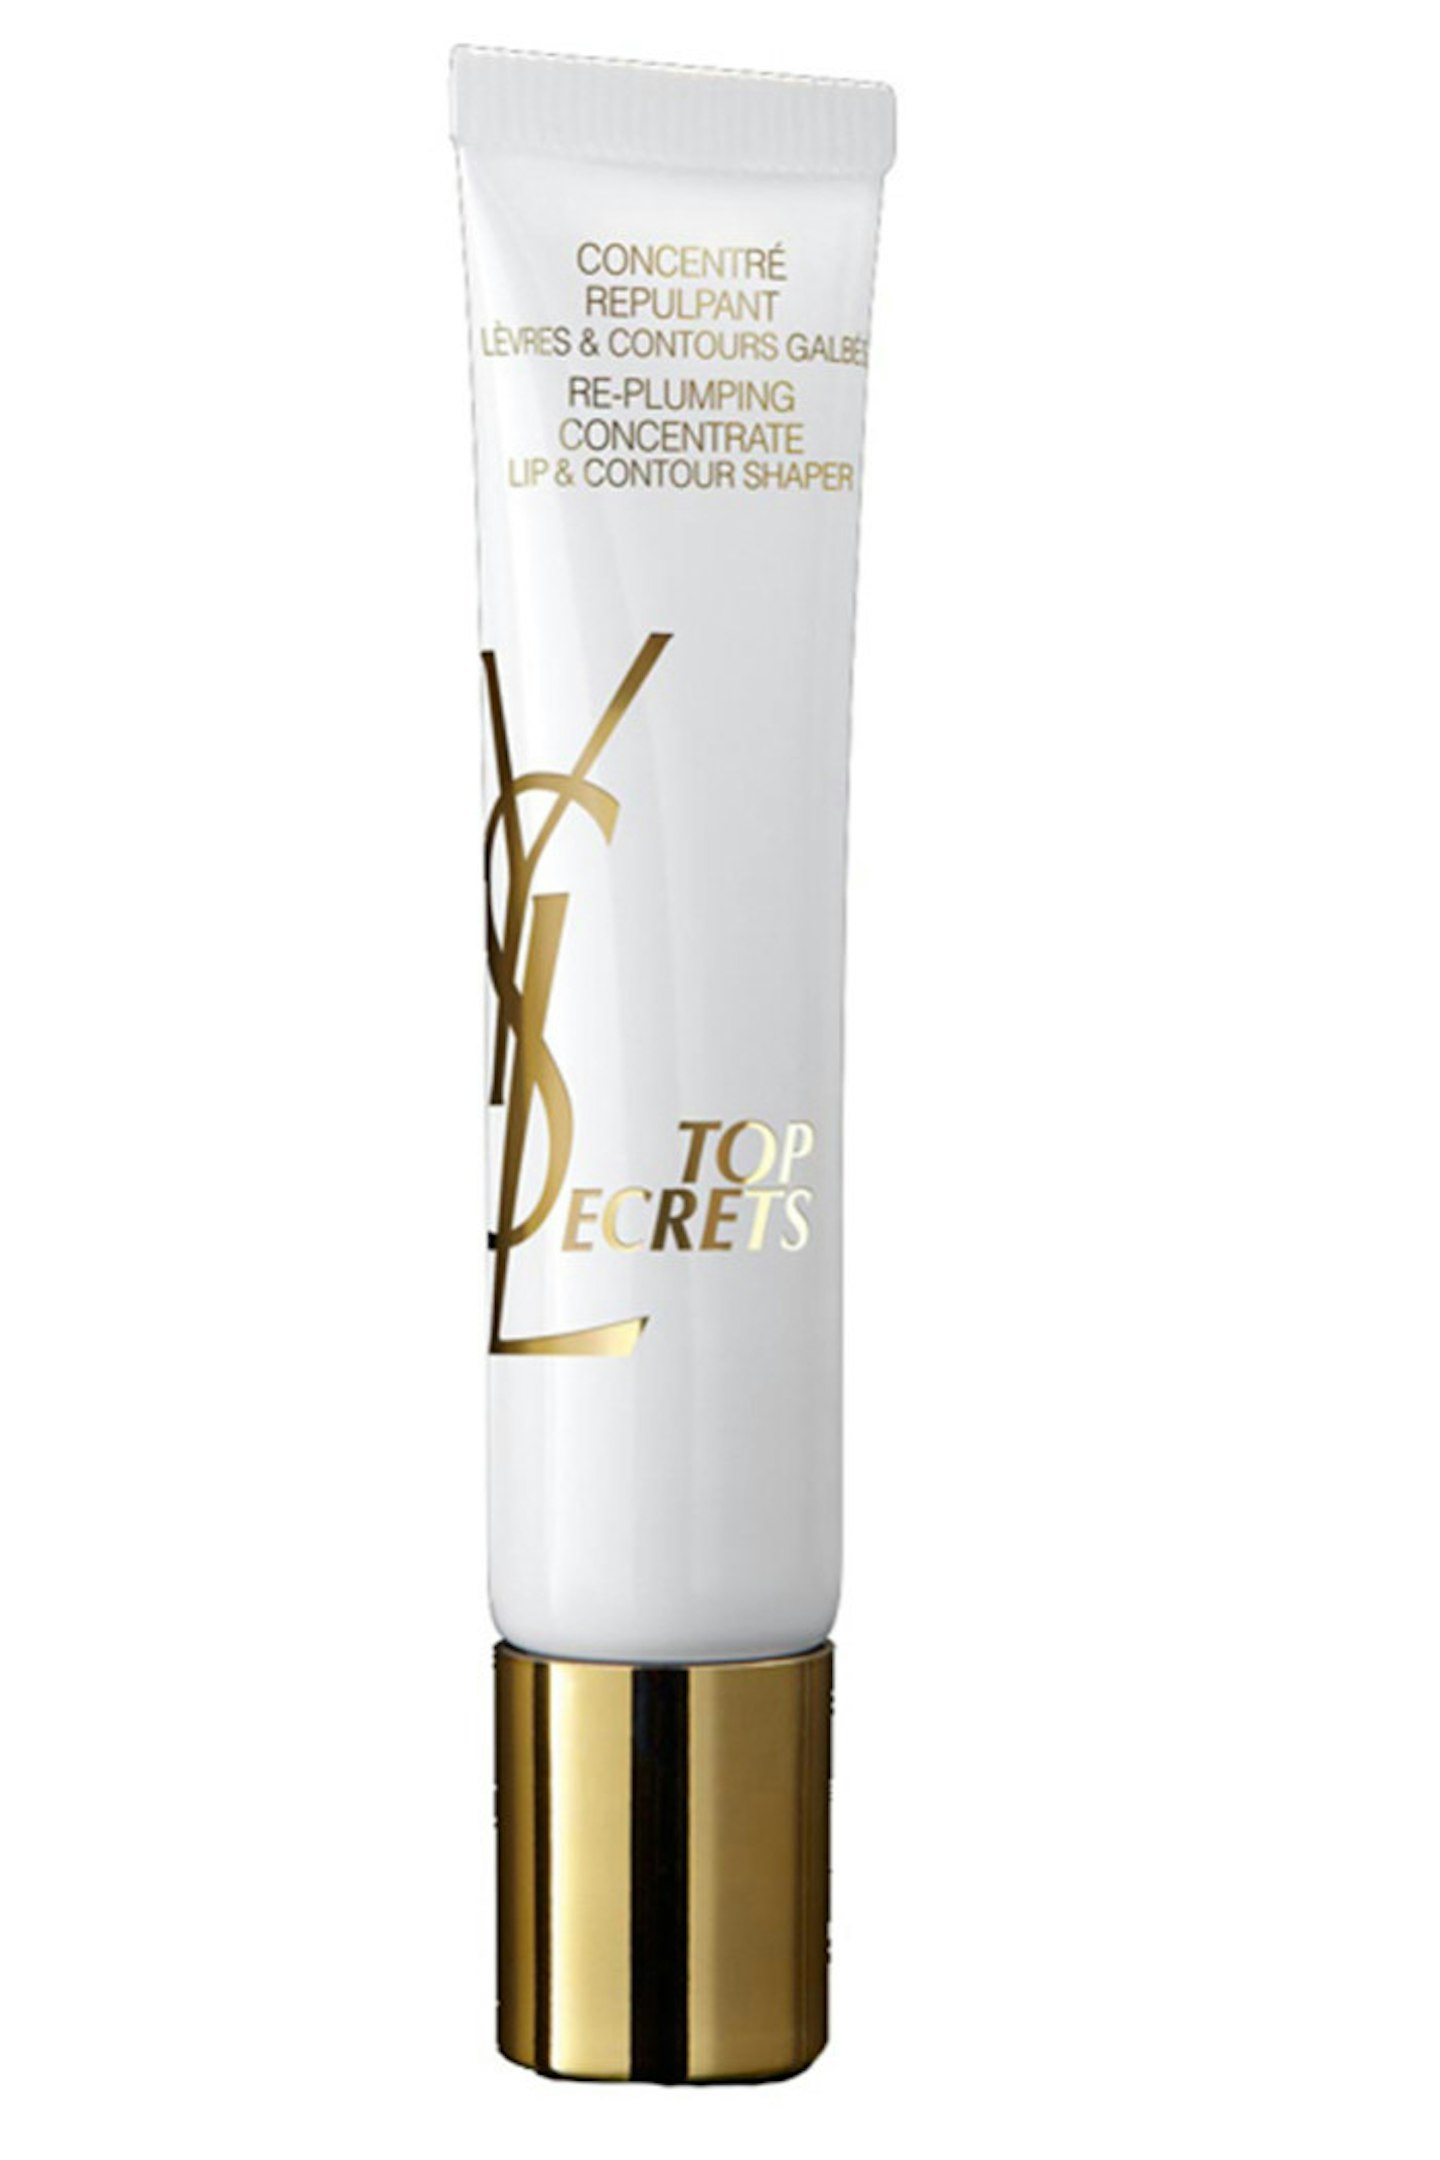 YSL Re-Plumping Concentrate, £24